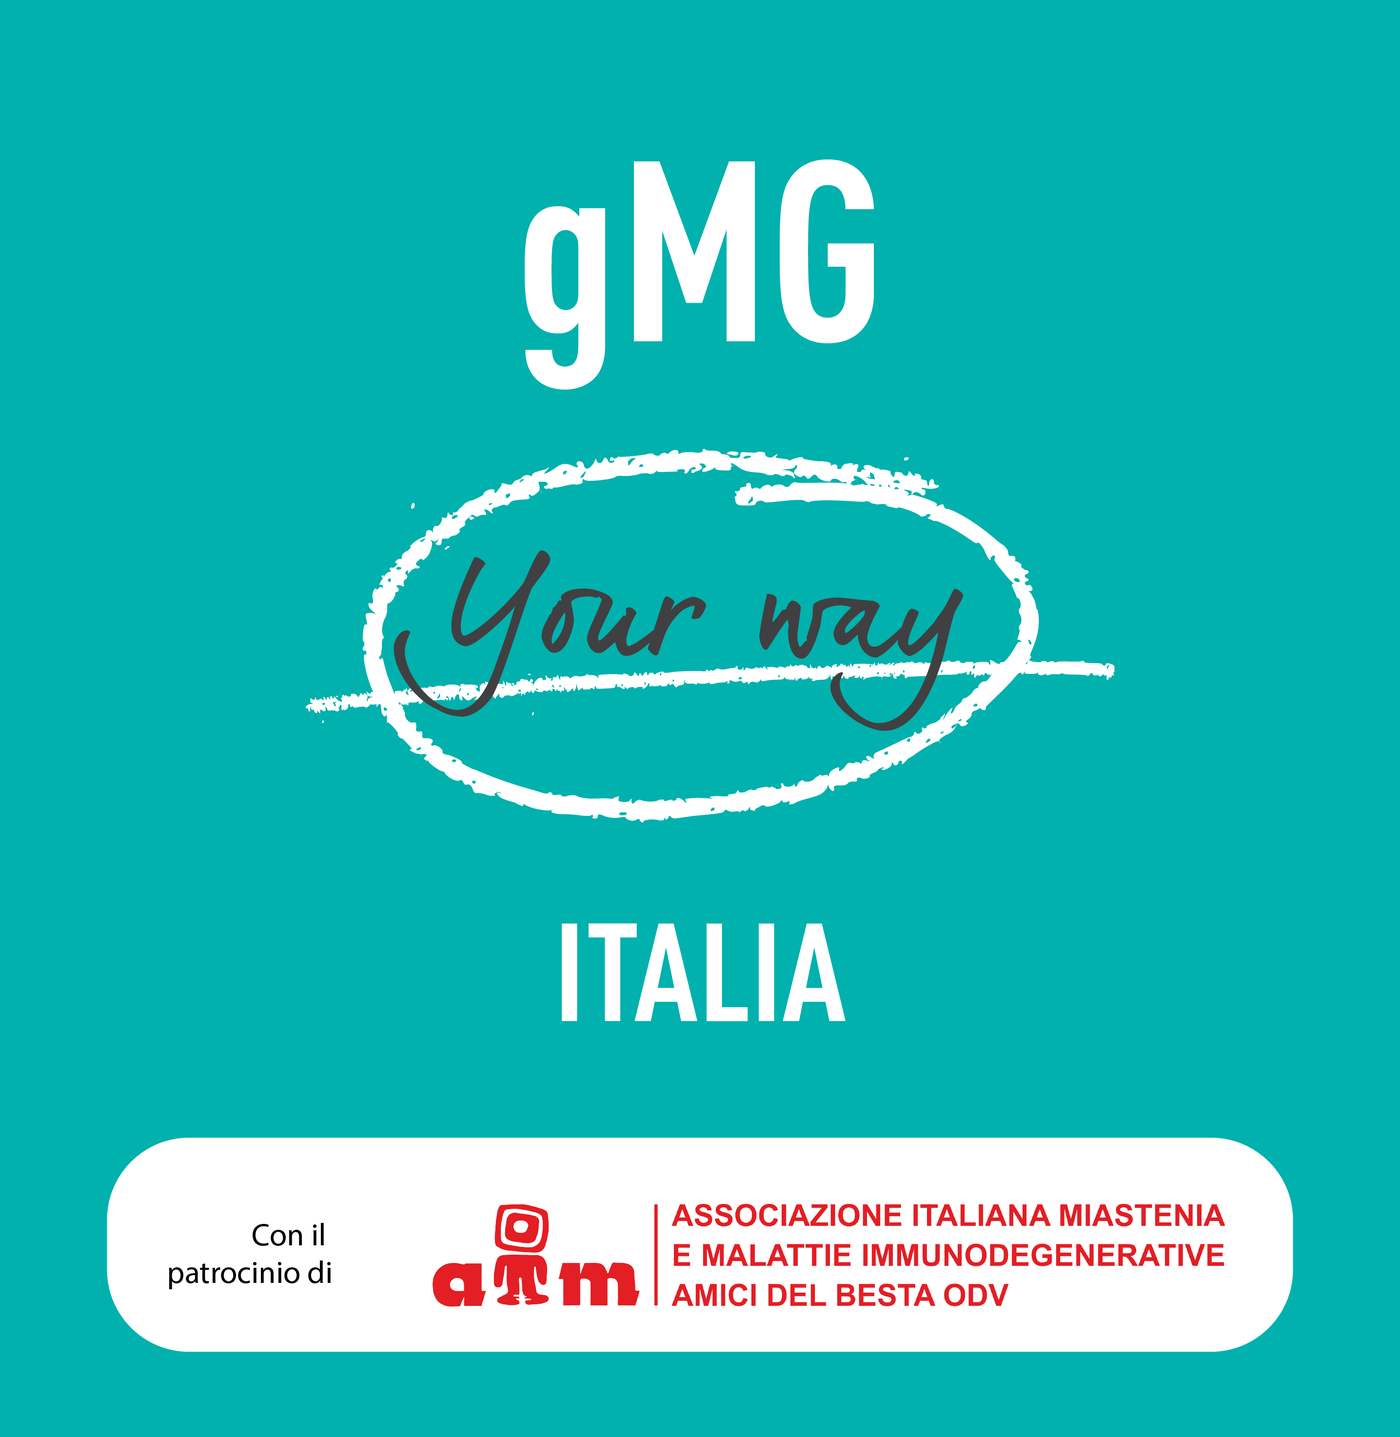 gMG Your way Podcast - Italia